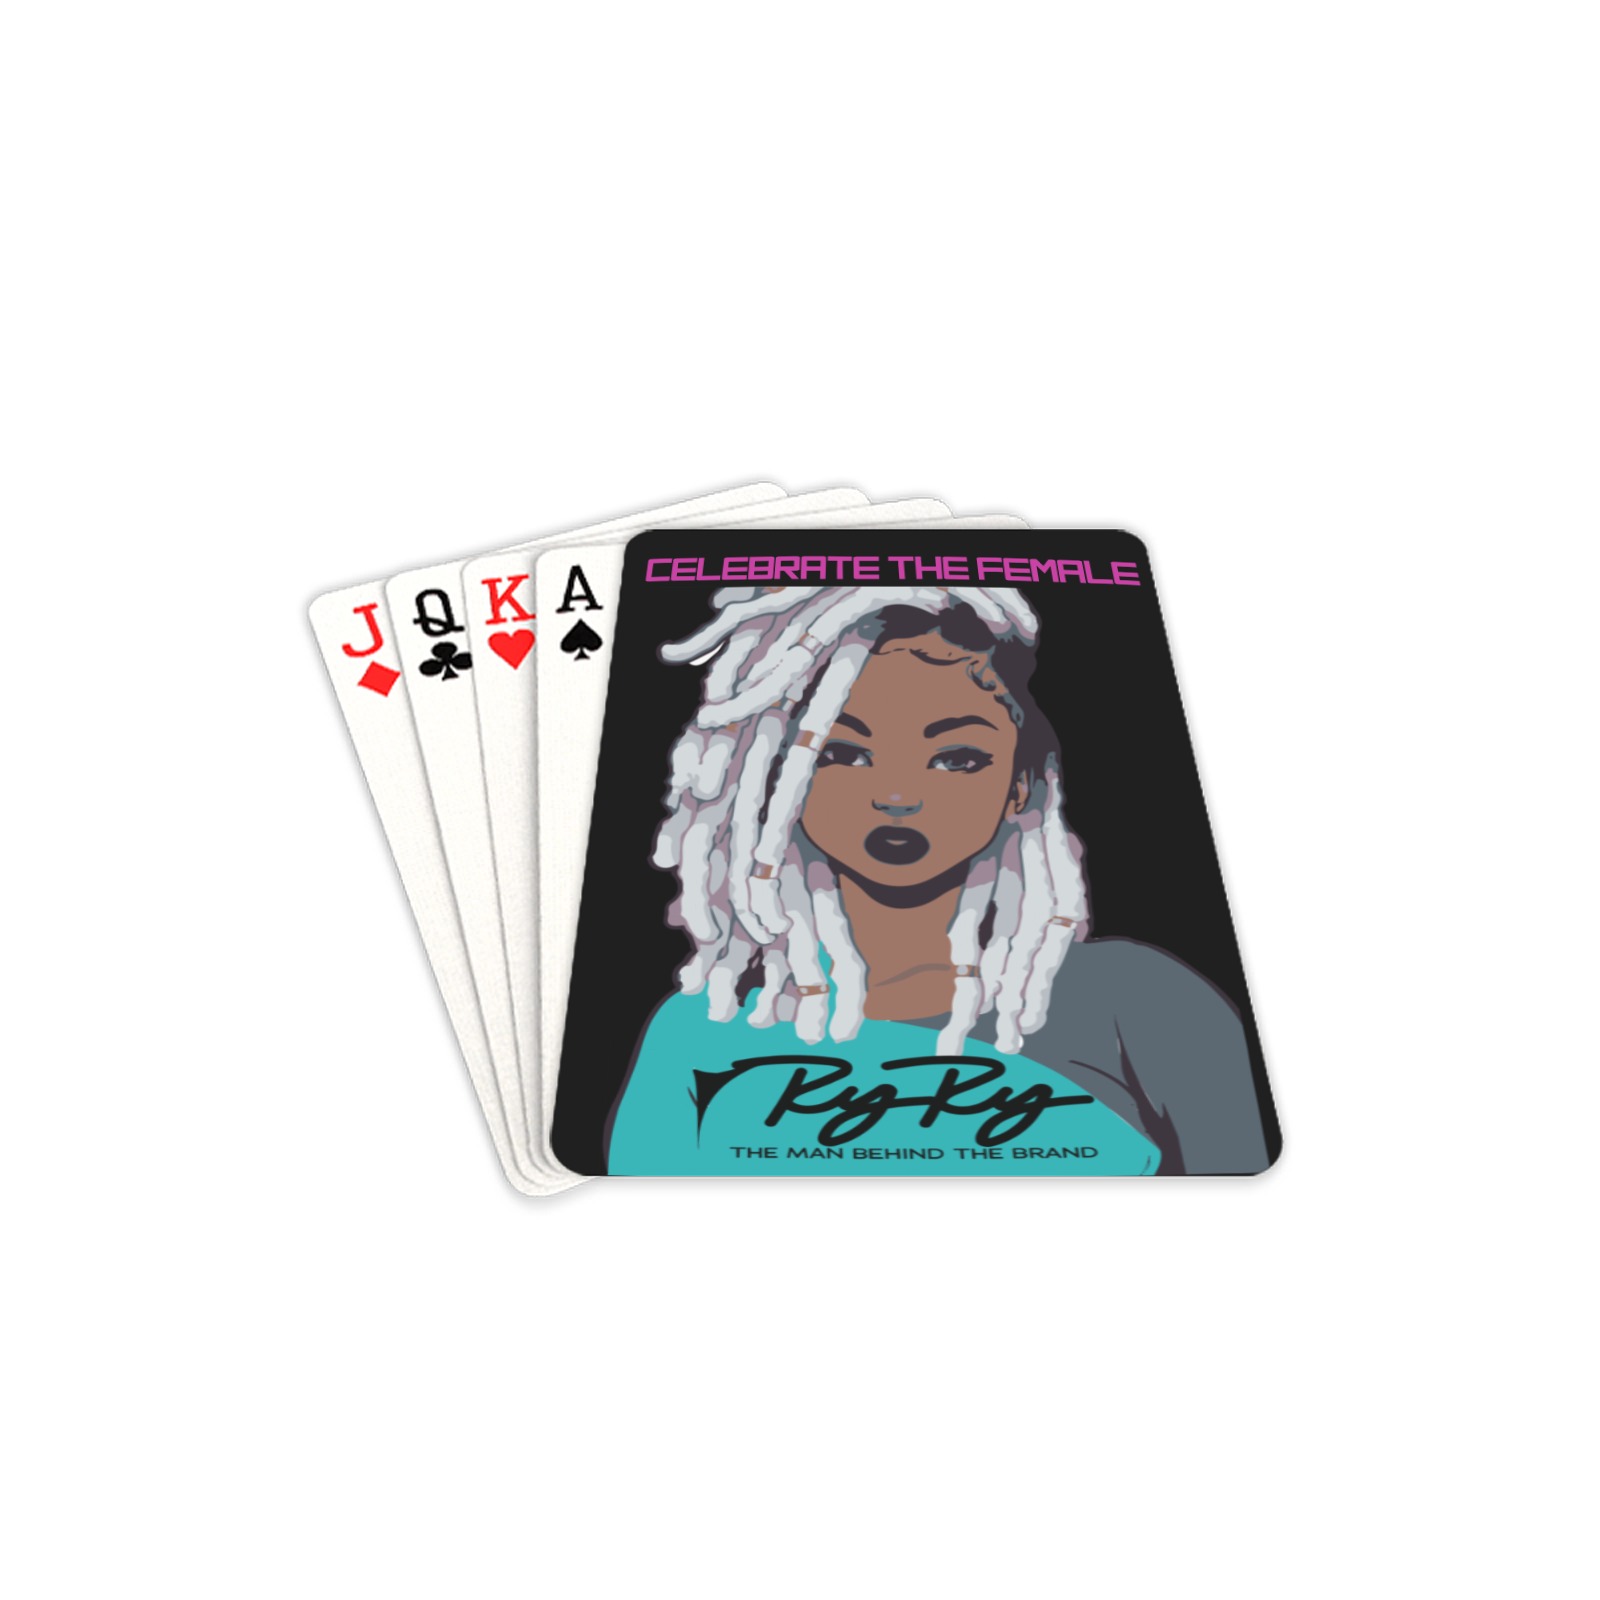 Celebrate The Female" playing cards Playing Cards 2.5"x3.5"